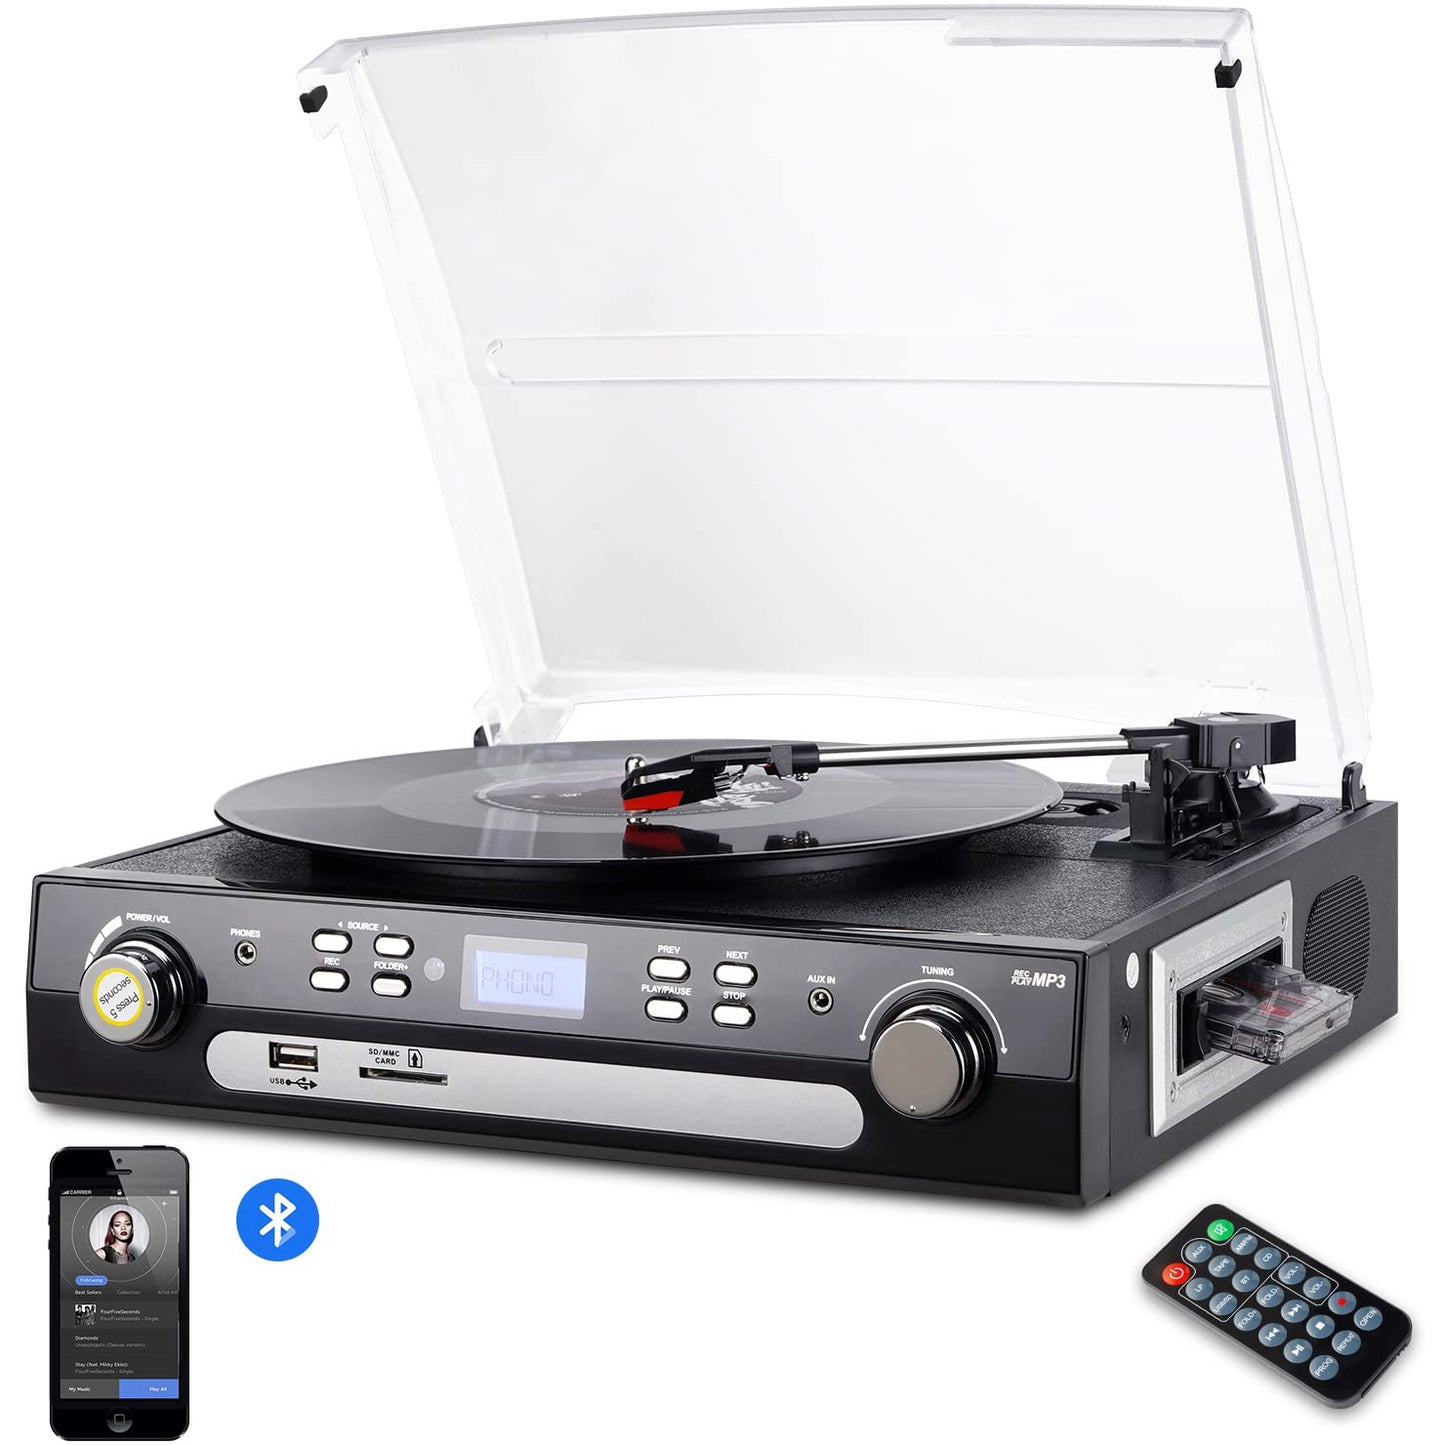 All-in-one Record Player Turntable for Vinyl to MP3 with Cassette Play